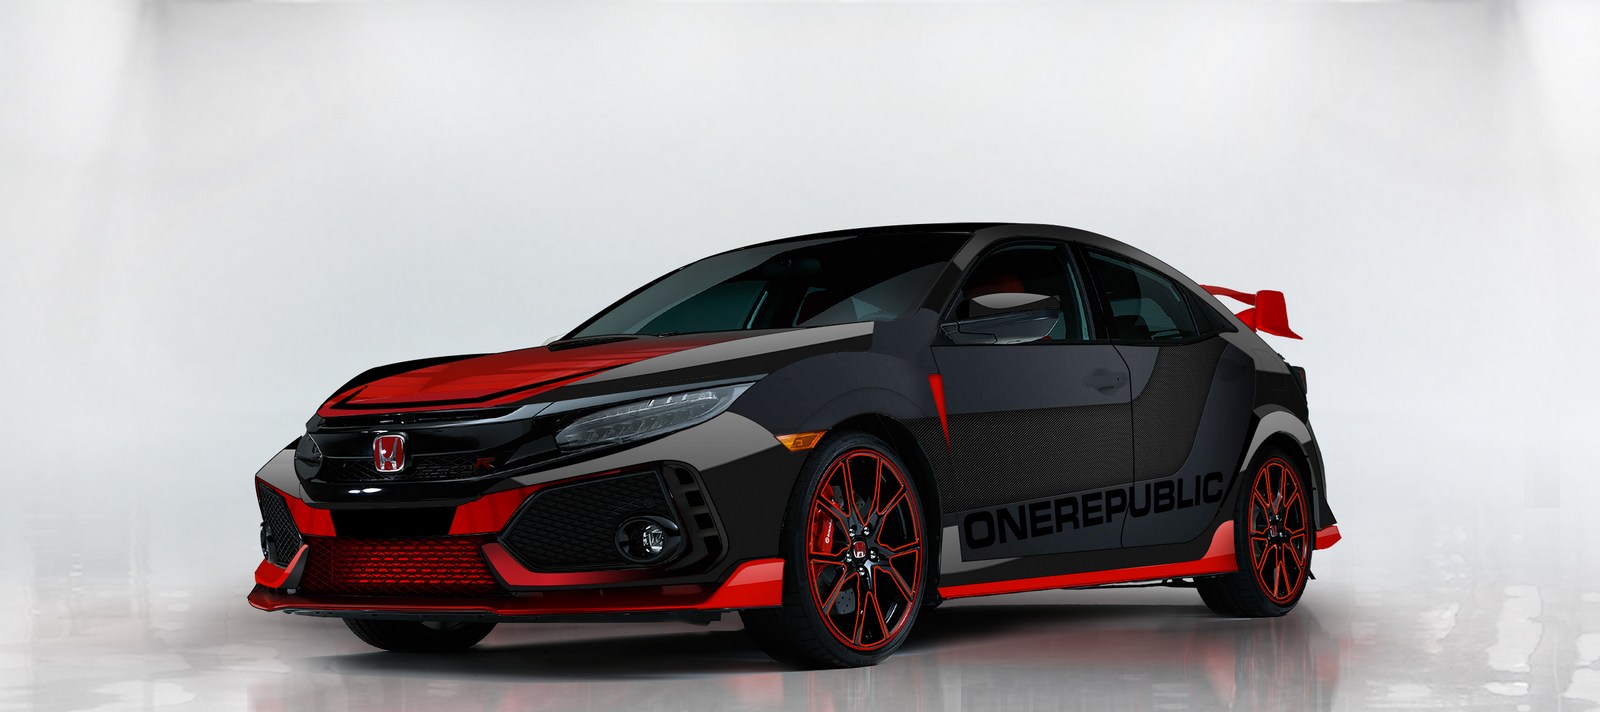 Honda Shows Off A Custom Civic Type R Designed By 